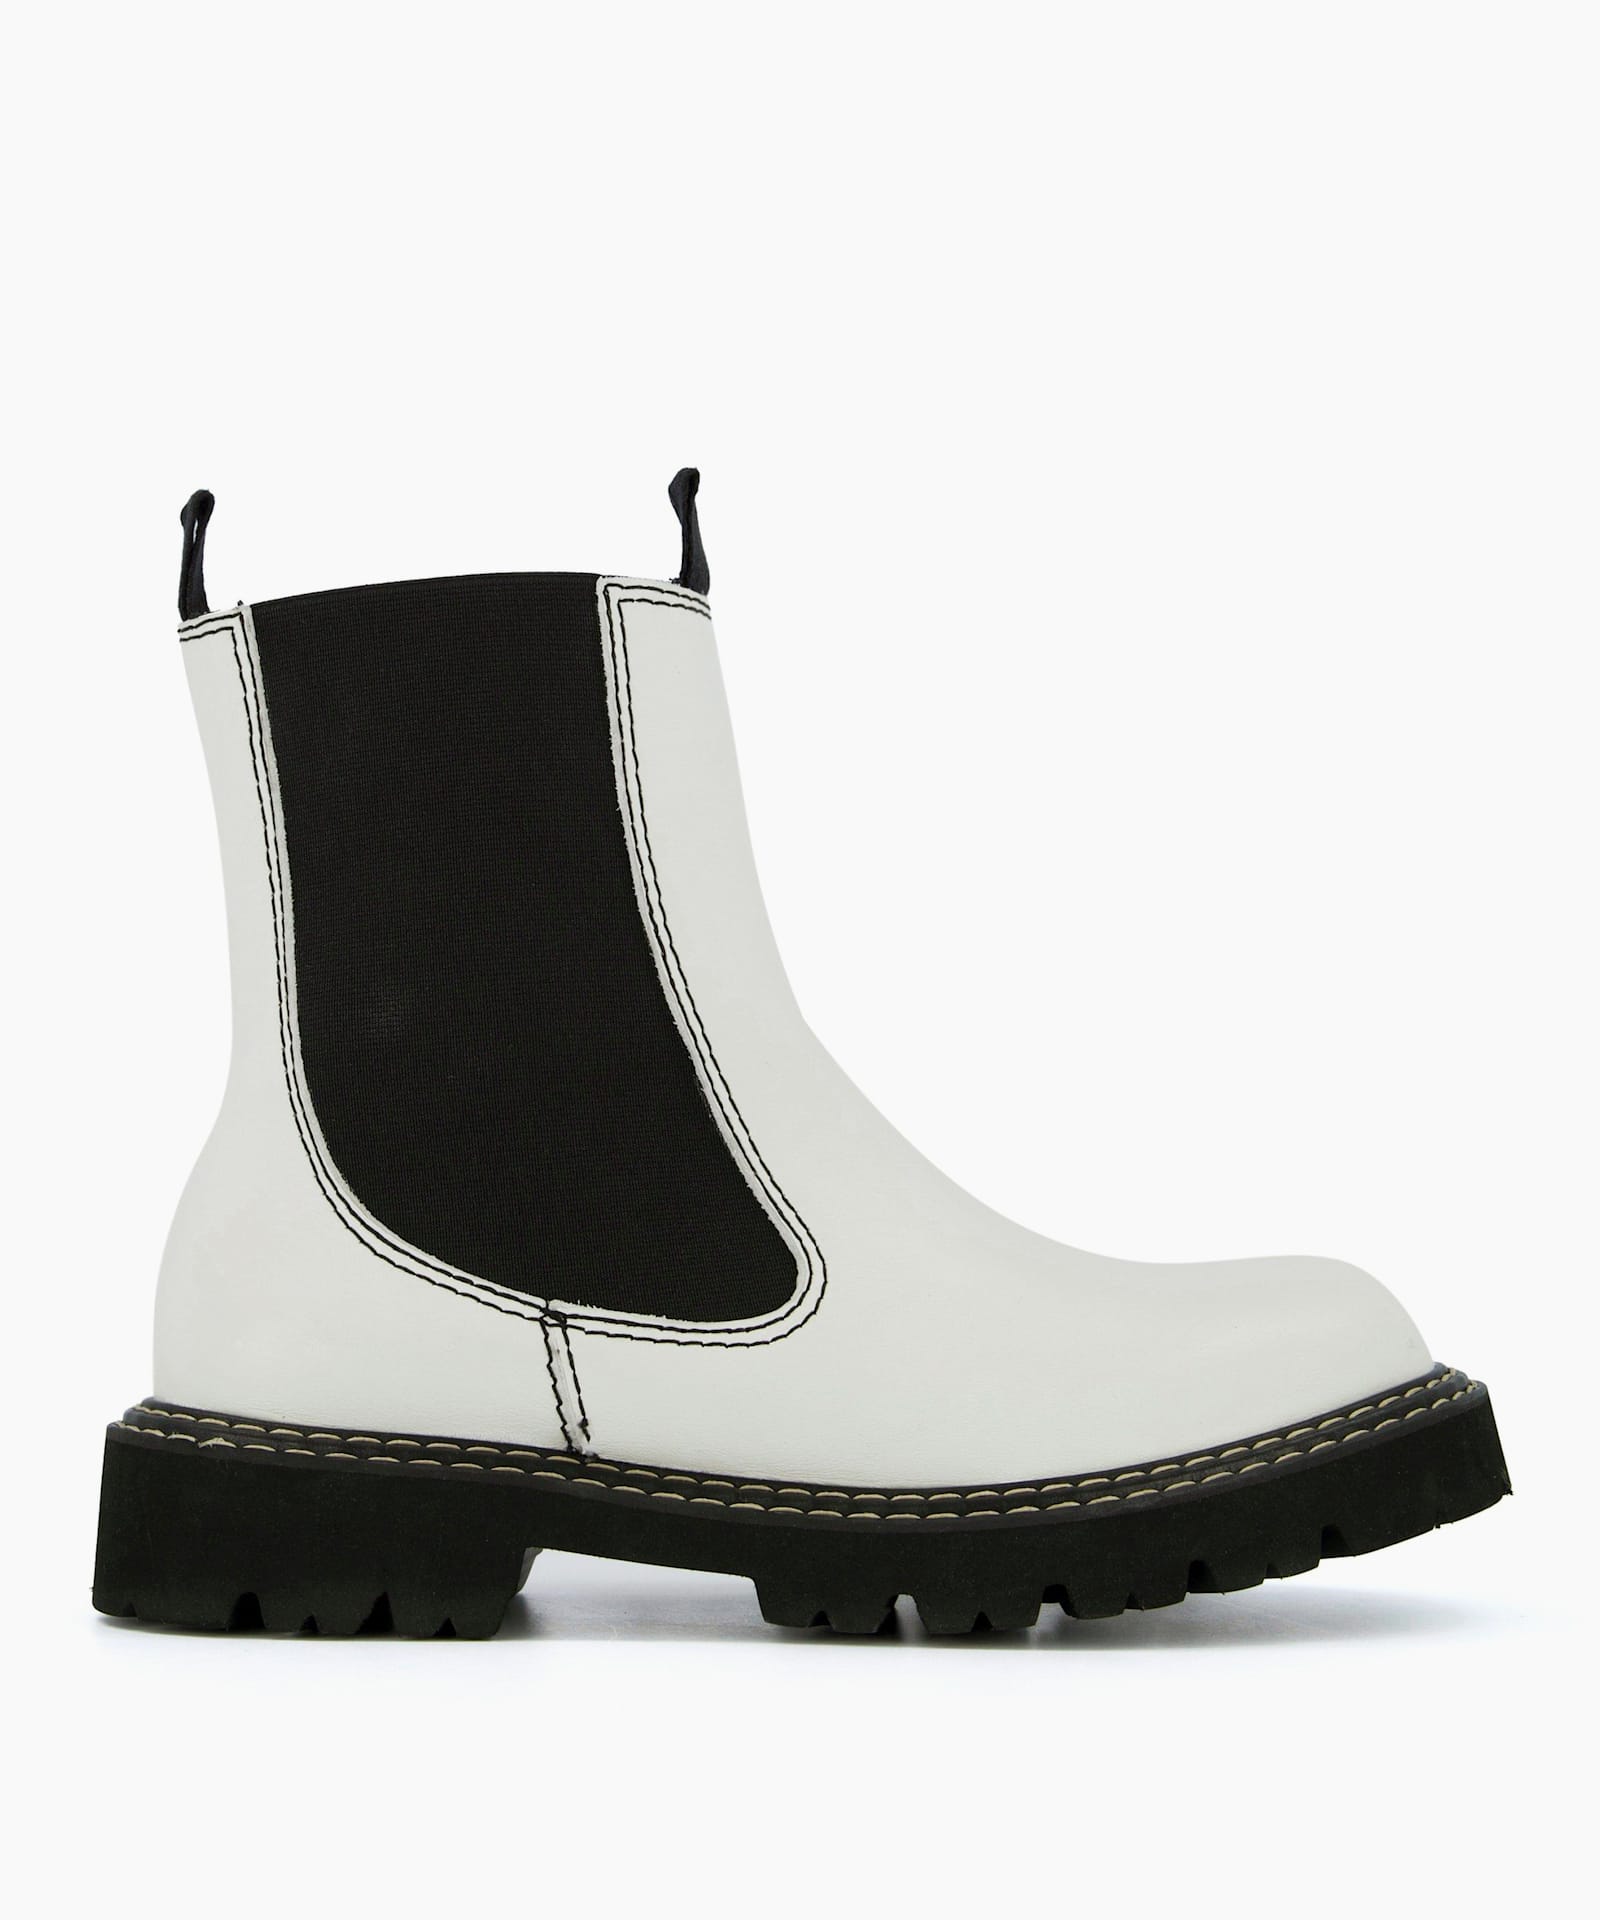 Black Boots With White Sole | lupon.gov.ph